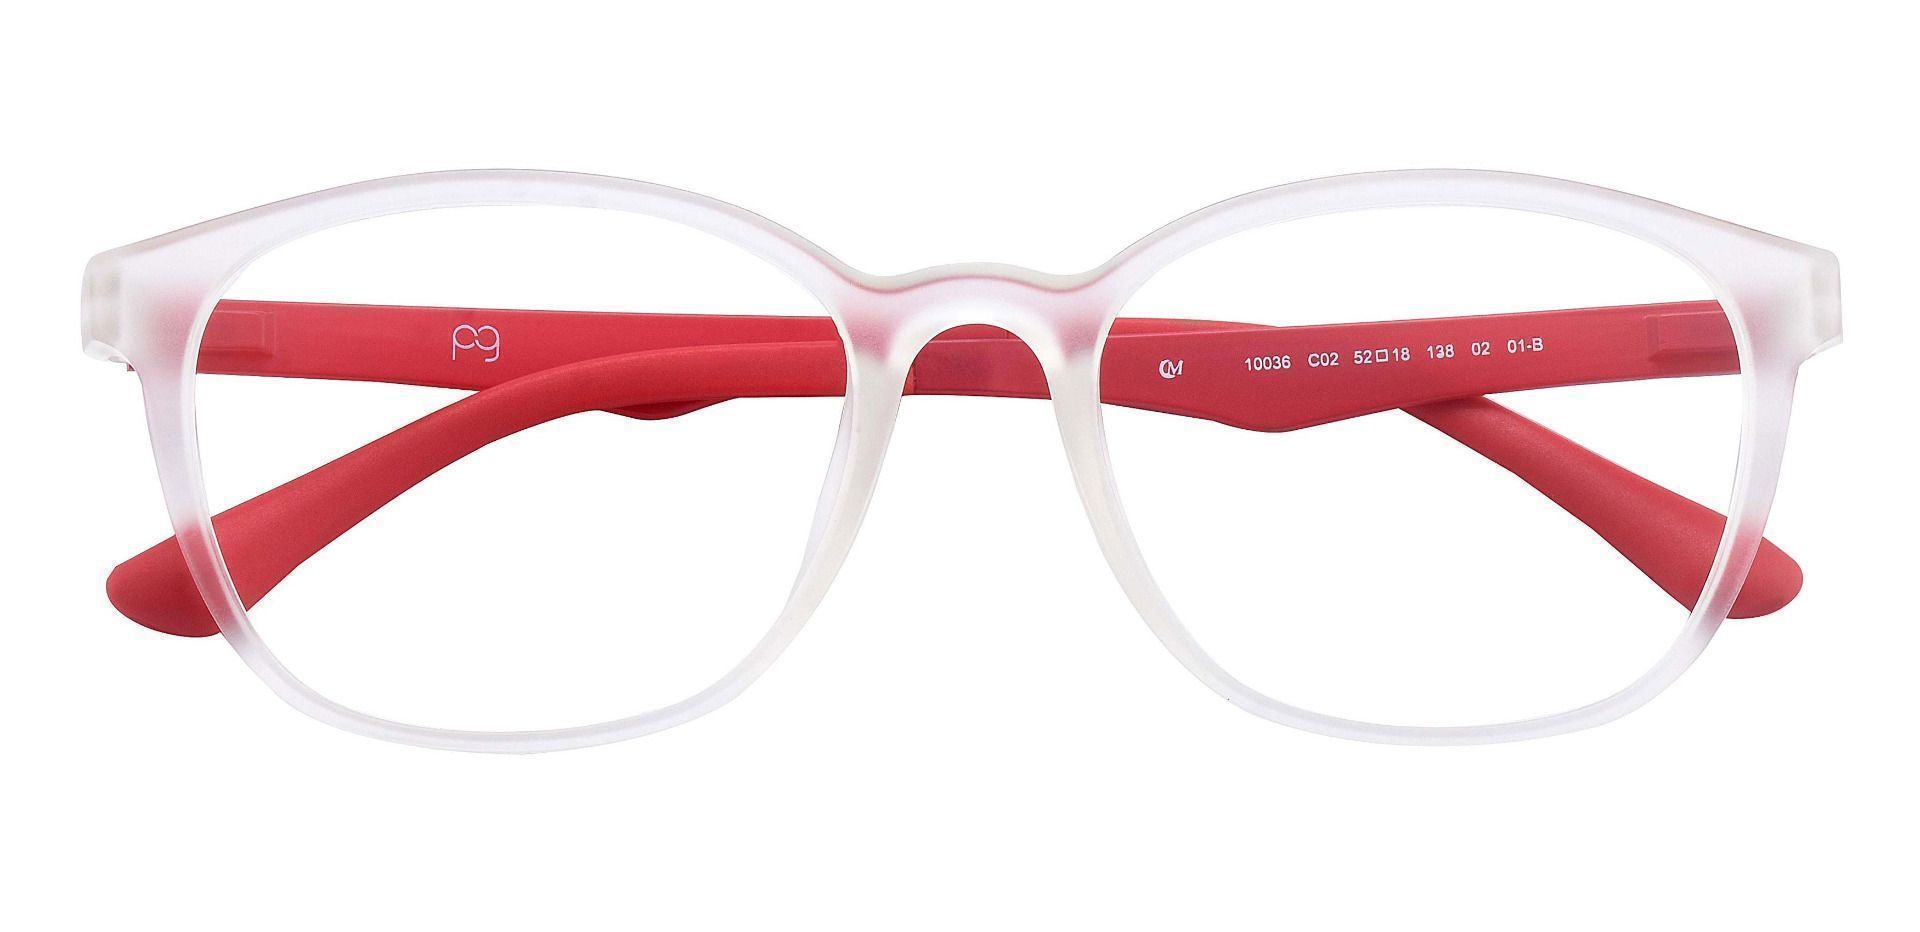 Hillman Rectangle Prescription Glasses - The Frame Is Clear And Red